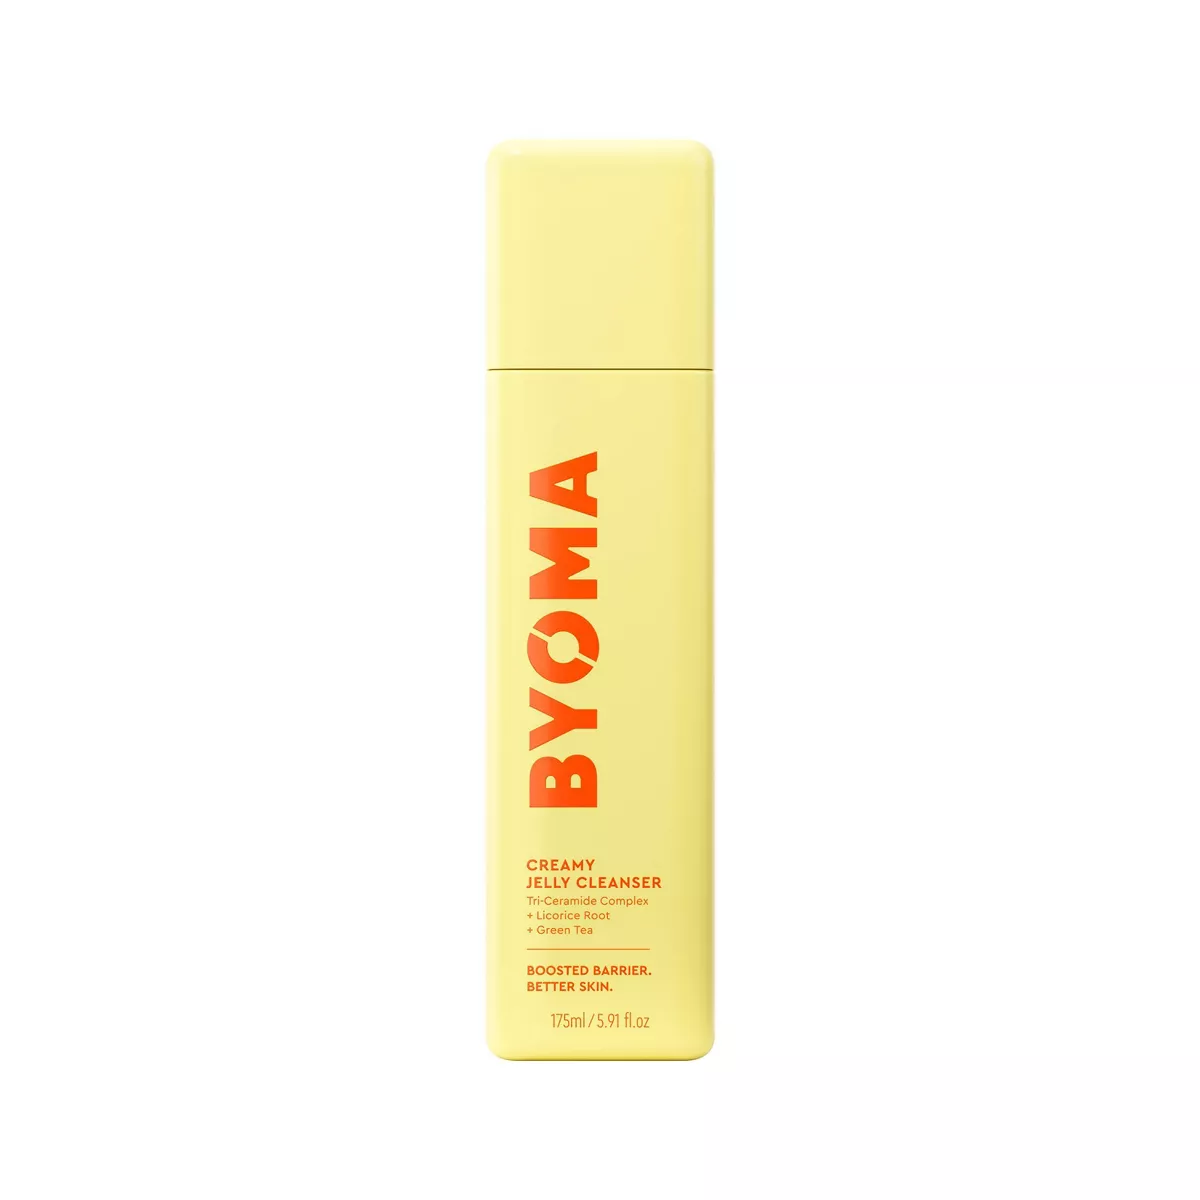 The Byoma cleanser